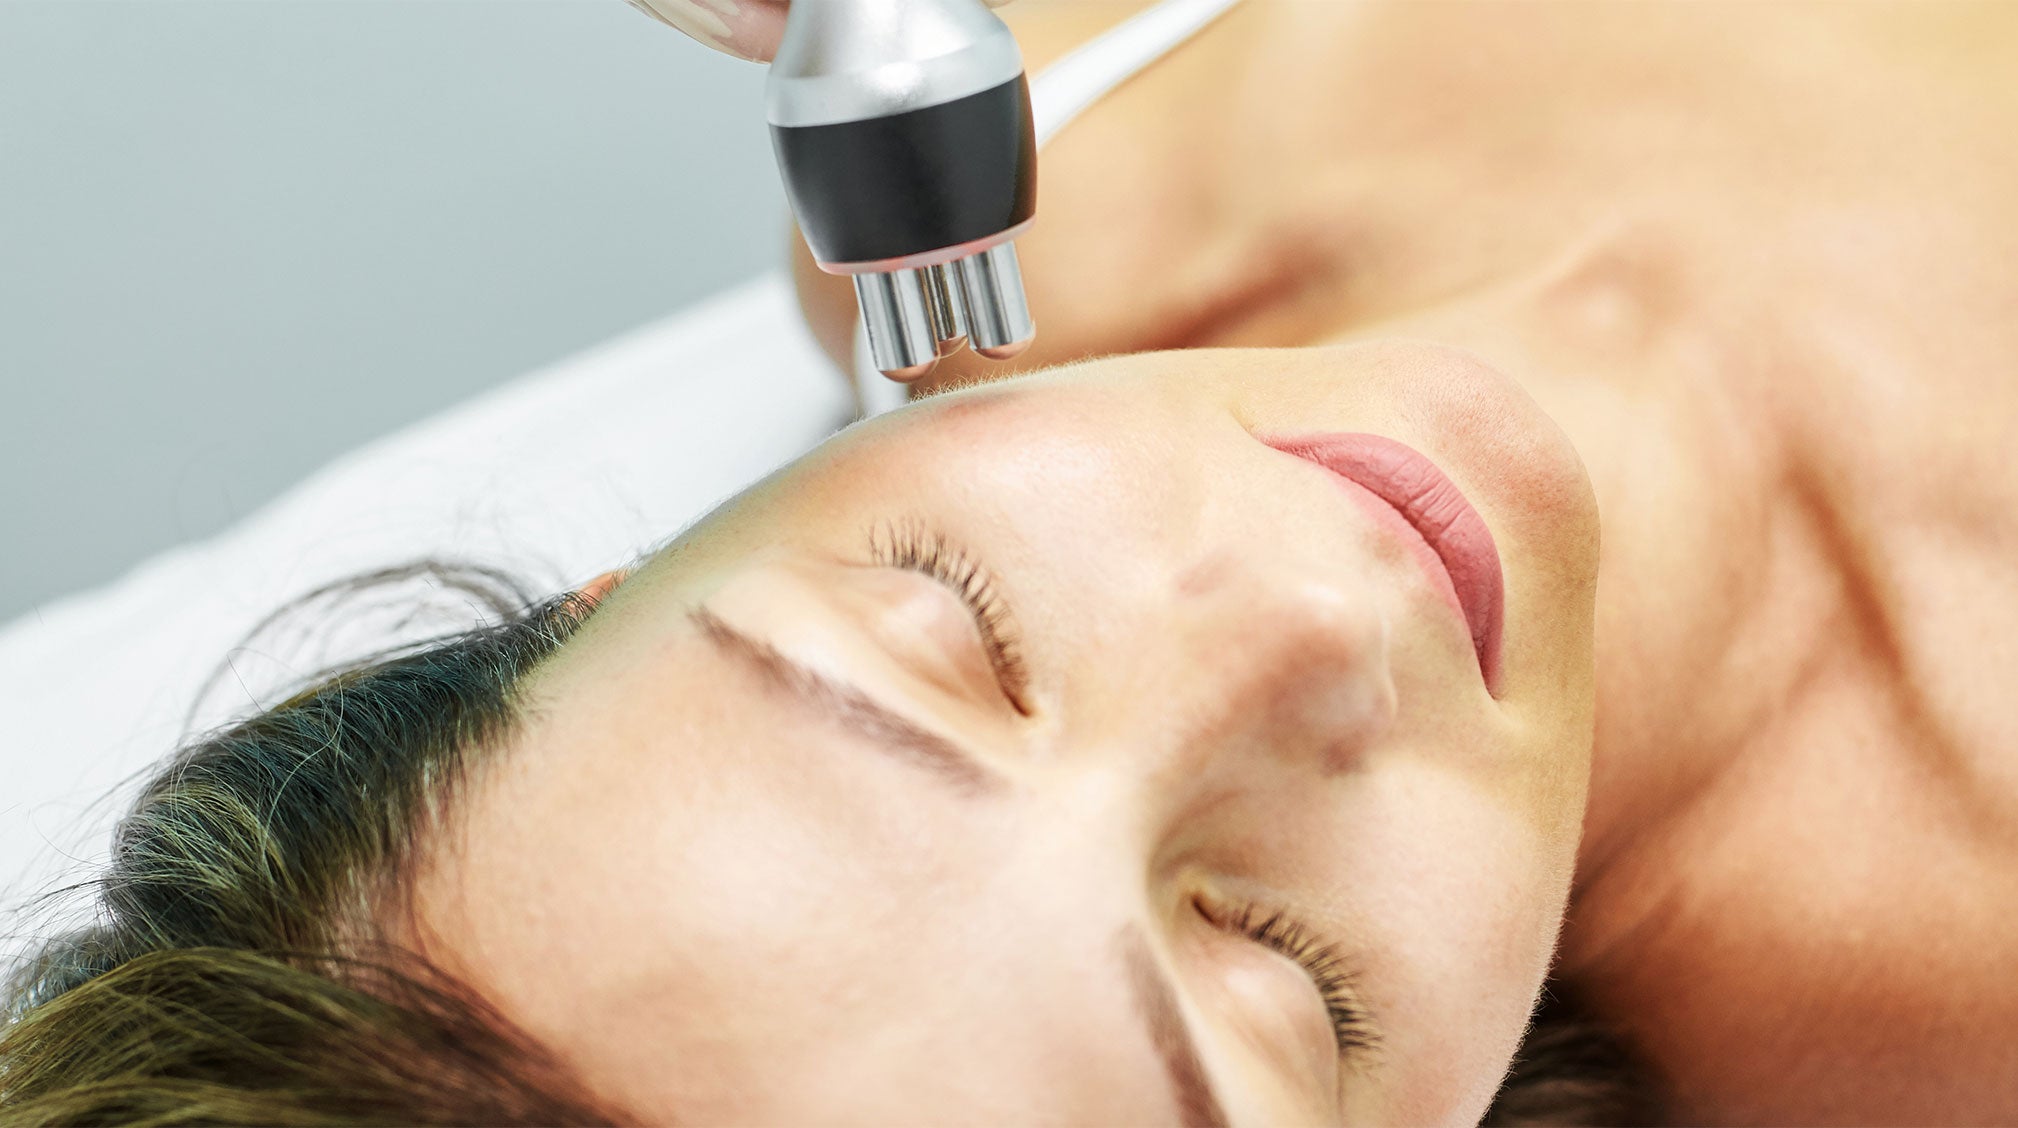 Highlighting Laser Skin Resurfacing: What It Is and What to Expect